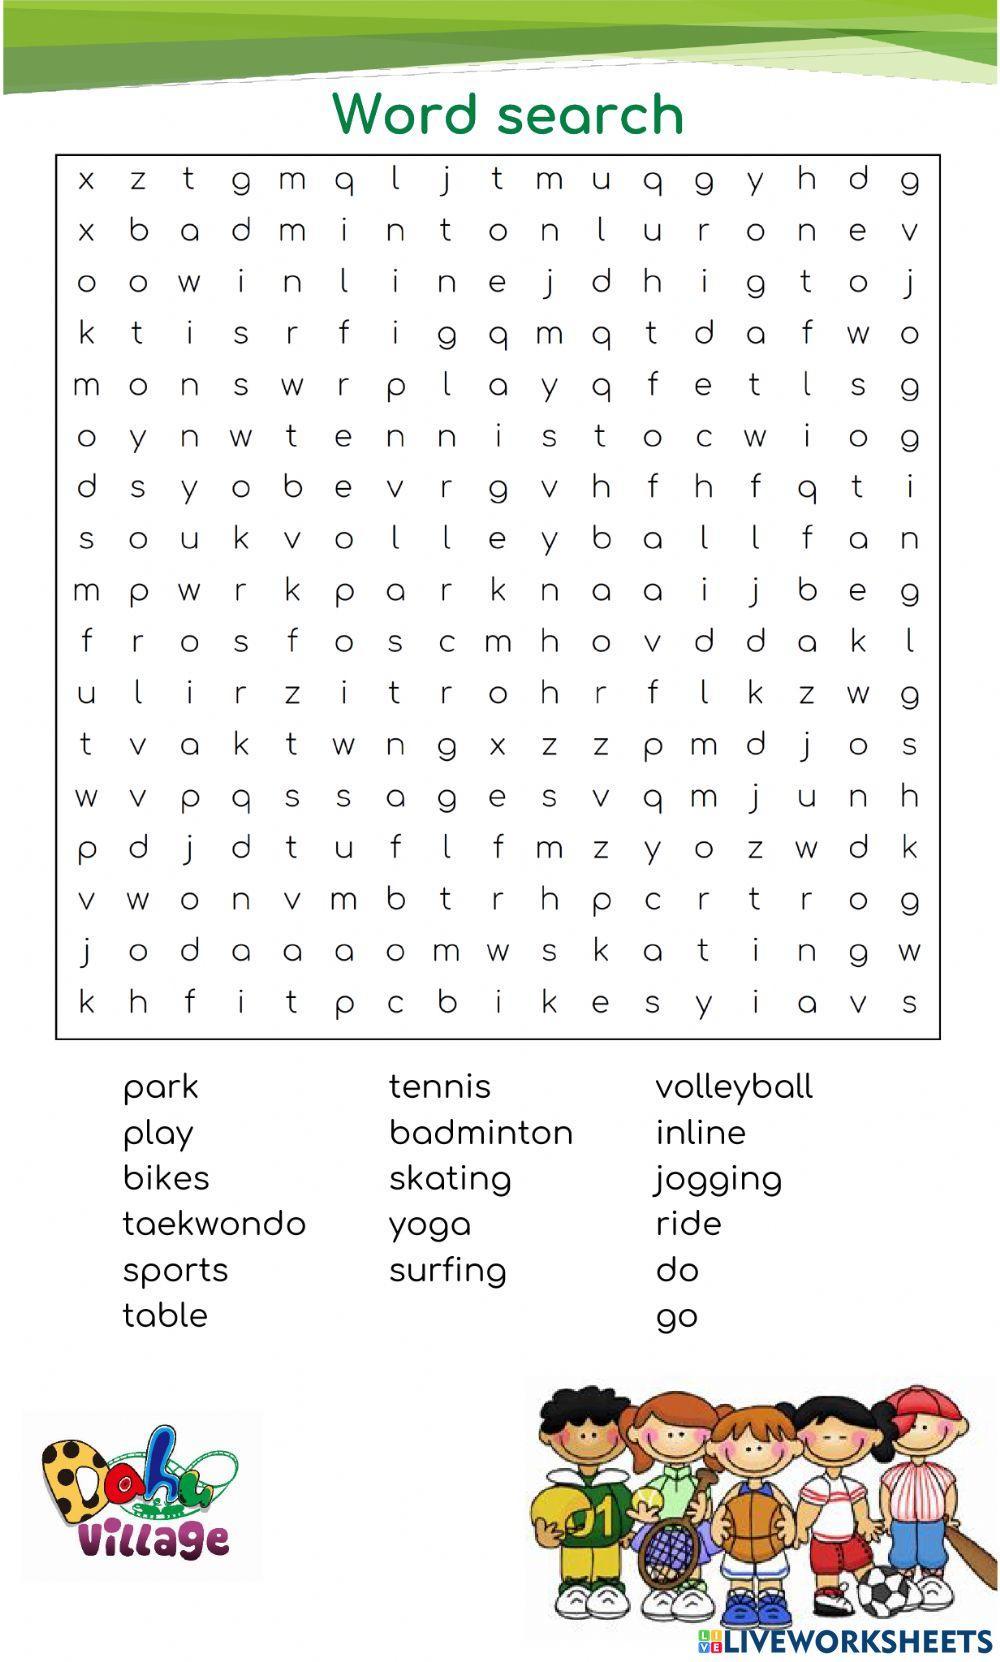 Online Lesson: Sports Park - Word search